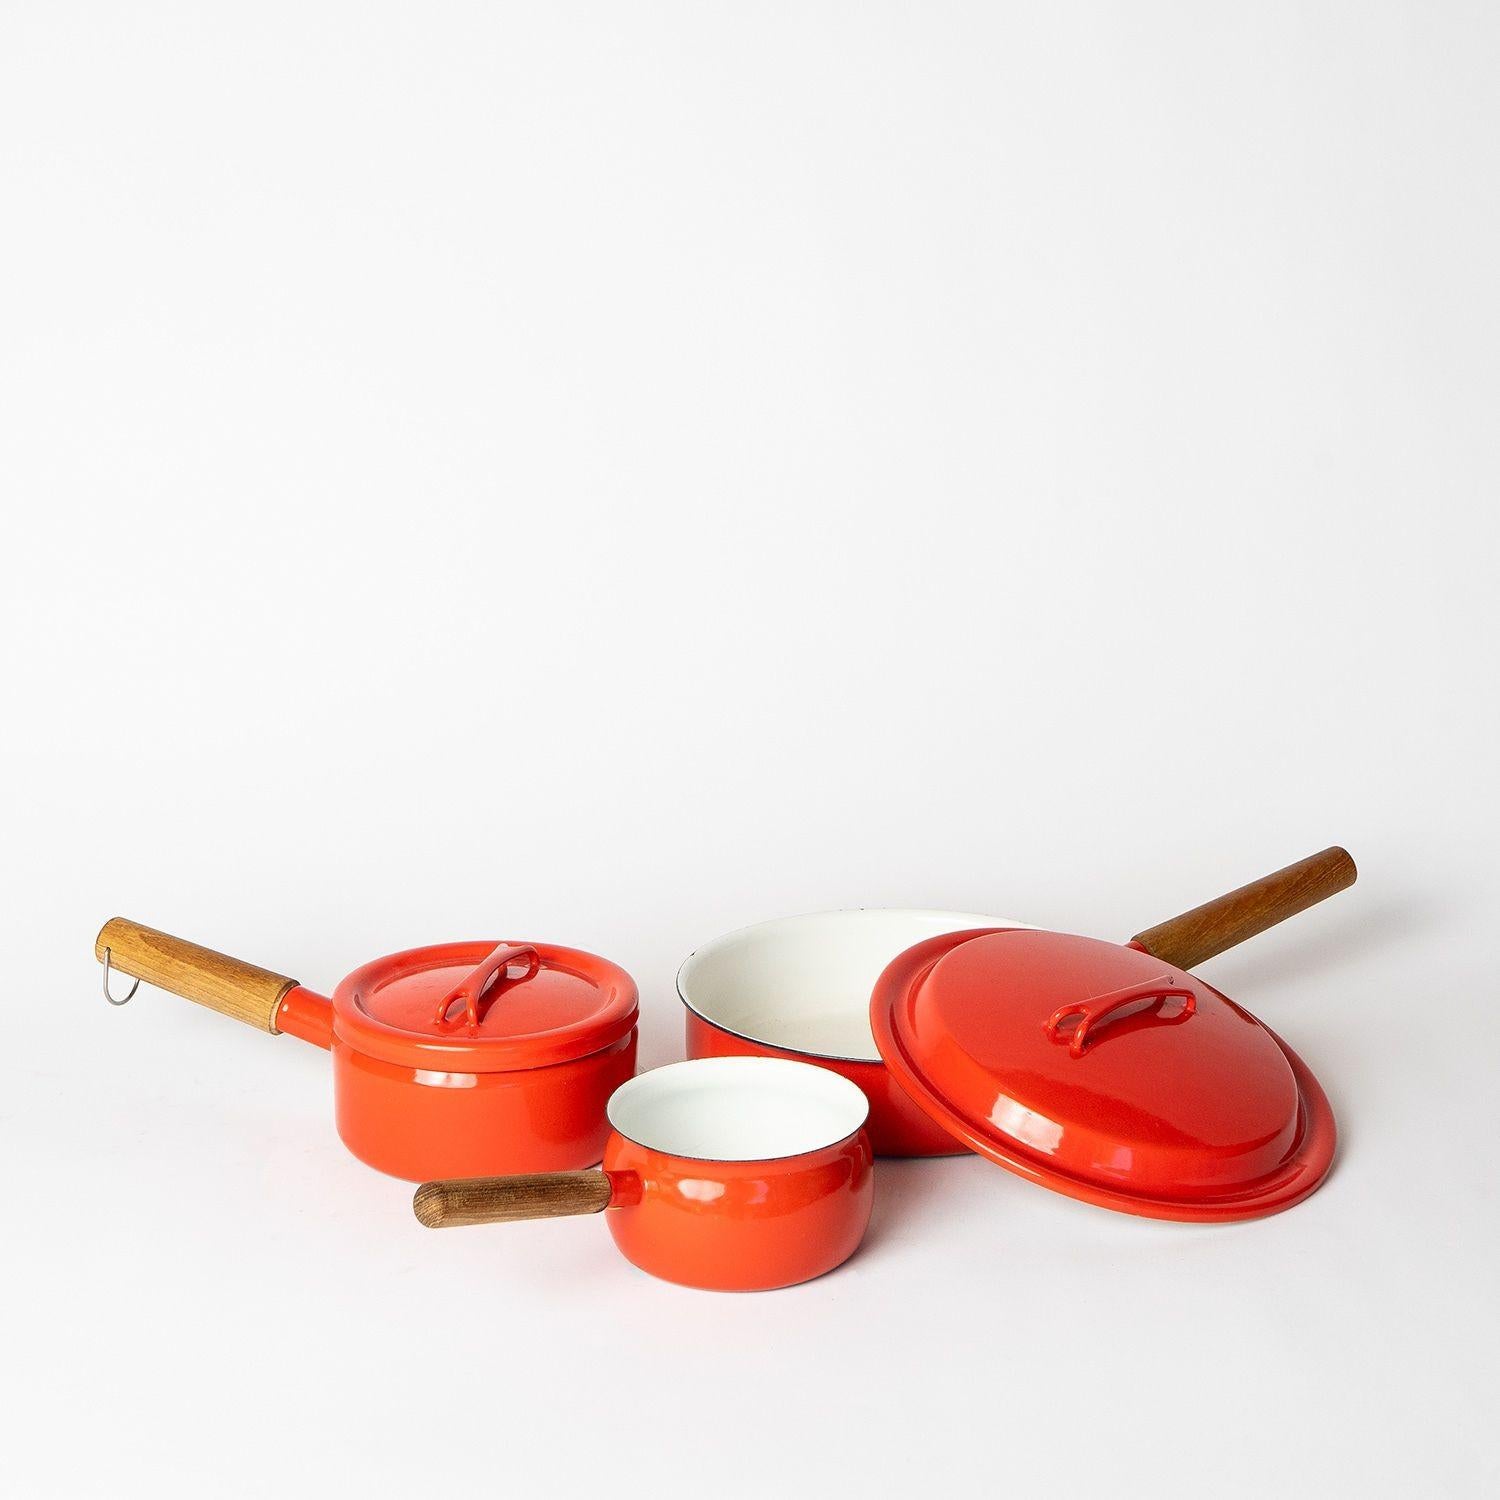 20th Century Set of Vintage Enamel Saucepans by Seppo Mallat for Finel Arabia Finland, 1960s For Sale